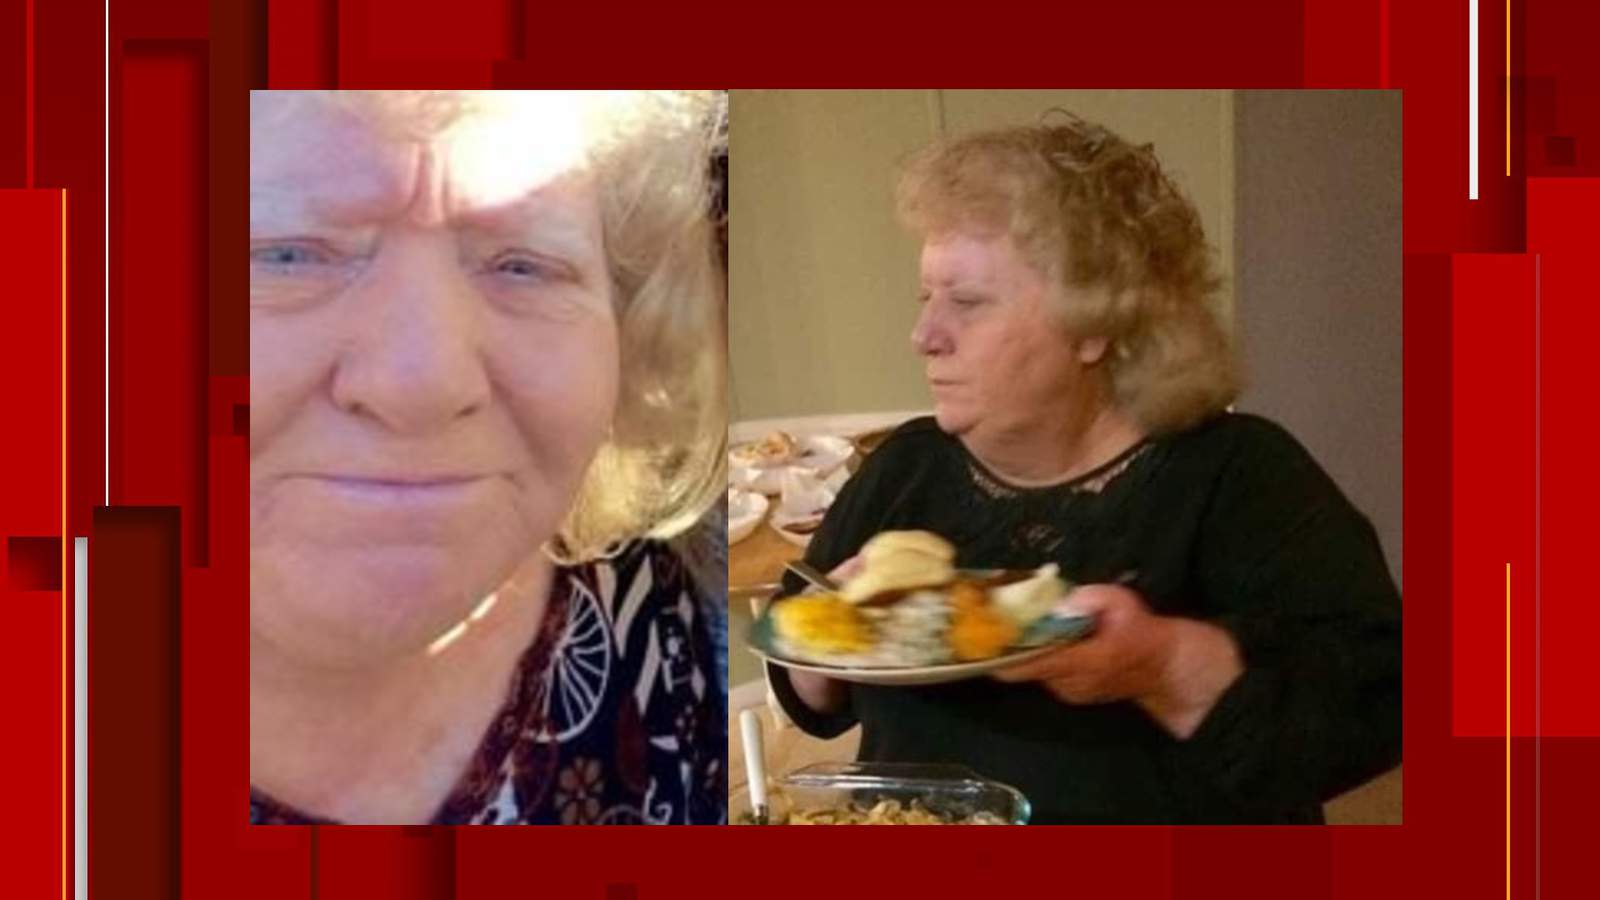 Bedford County woman located safely after being reported missing